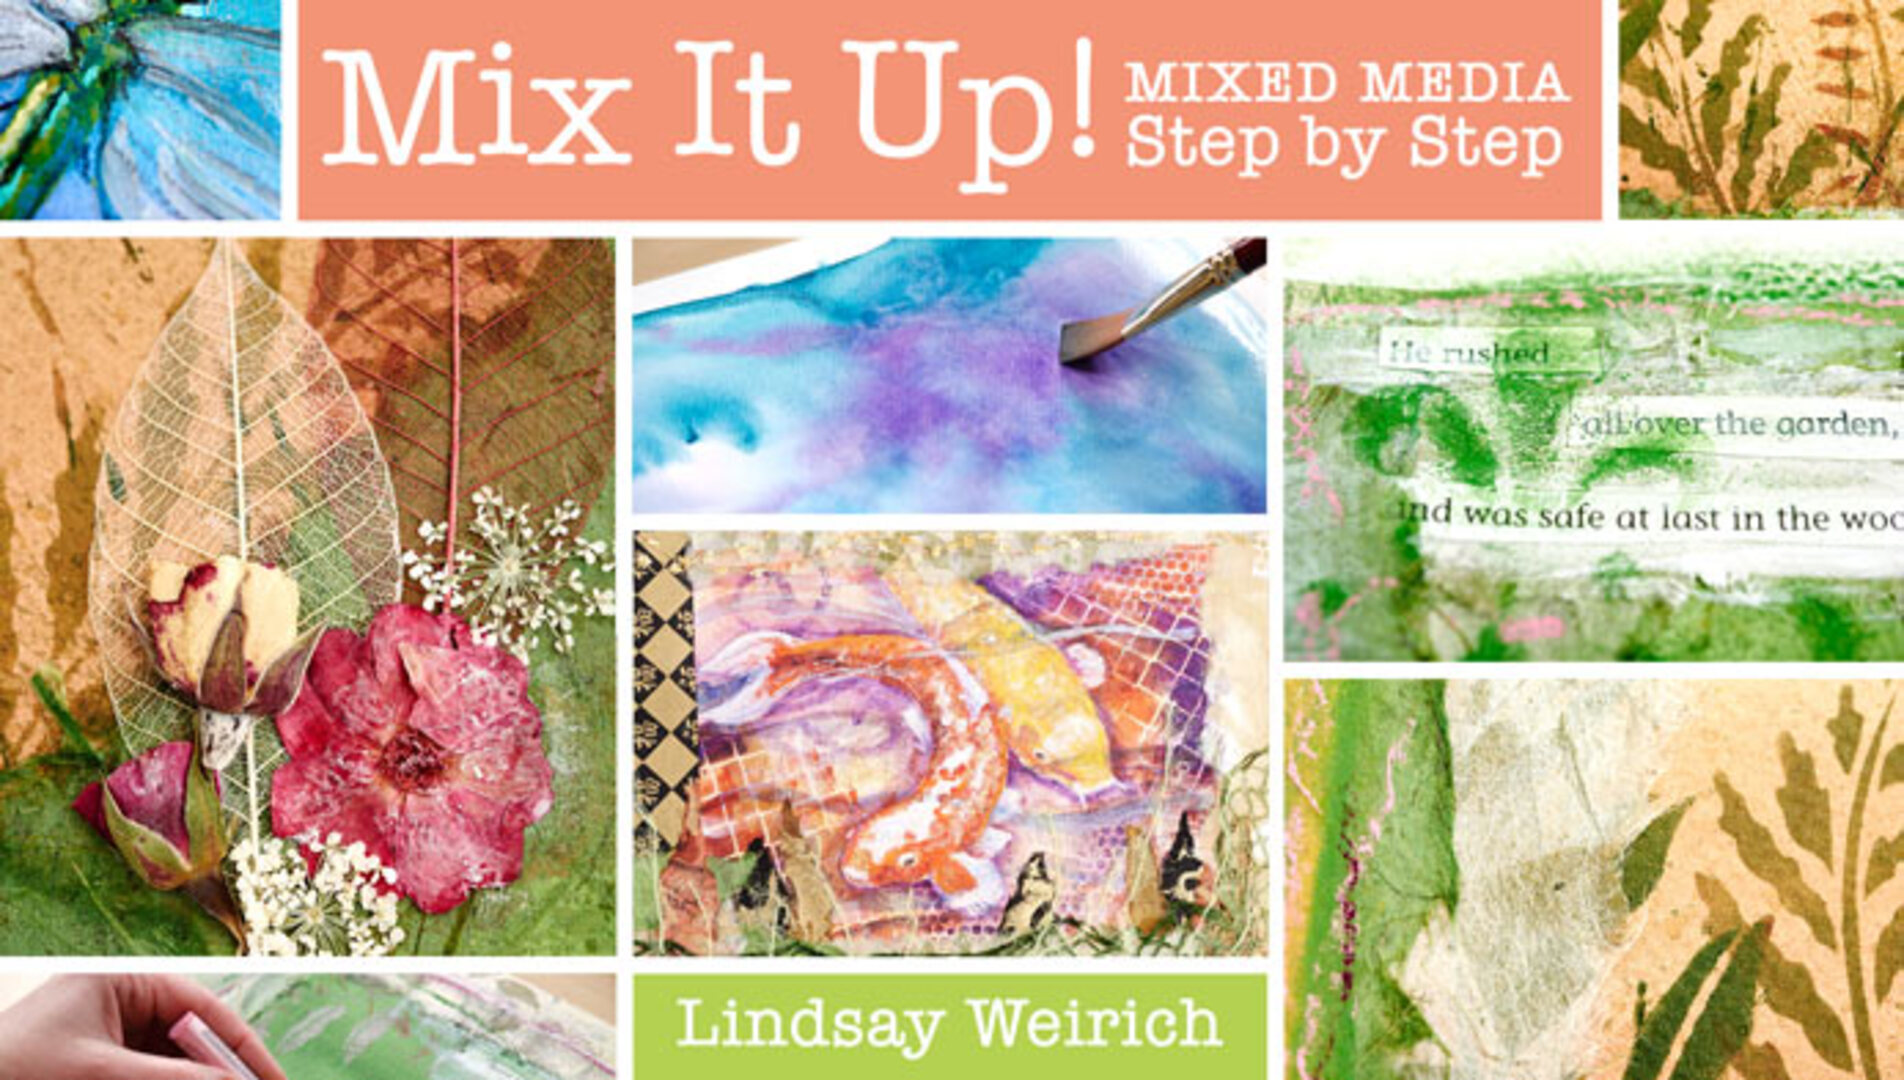 Mix It Upmixed Media Techniques With Citrasolv® and More 